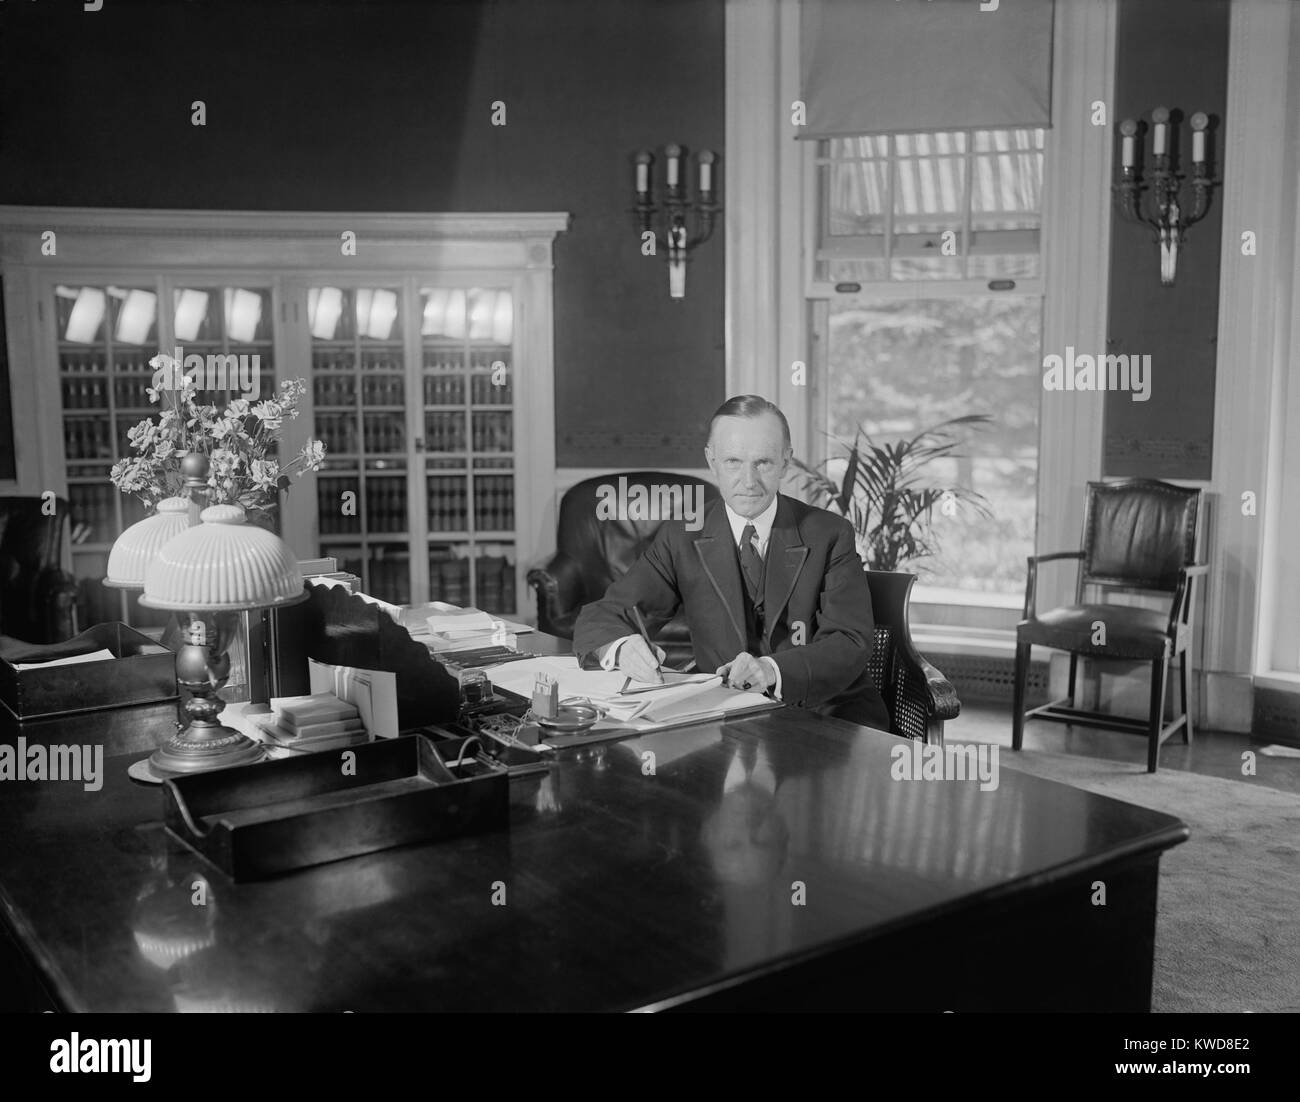 President Calvin Coolidge at the same desk used by Harding in the Oval Office. Photo was published on Aug. 14, 1923, less than two weeks after the death of Warren Harding. Florence Harding was upset that Coolidge sat at this desk for photographers before Warren Harding's body returned to the White House. (BSLOC 2015 15 97) Stock Photo